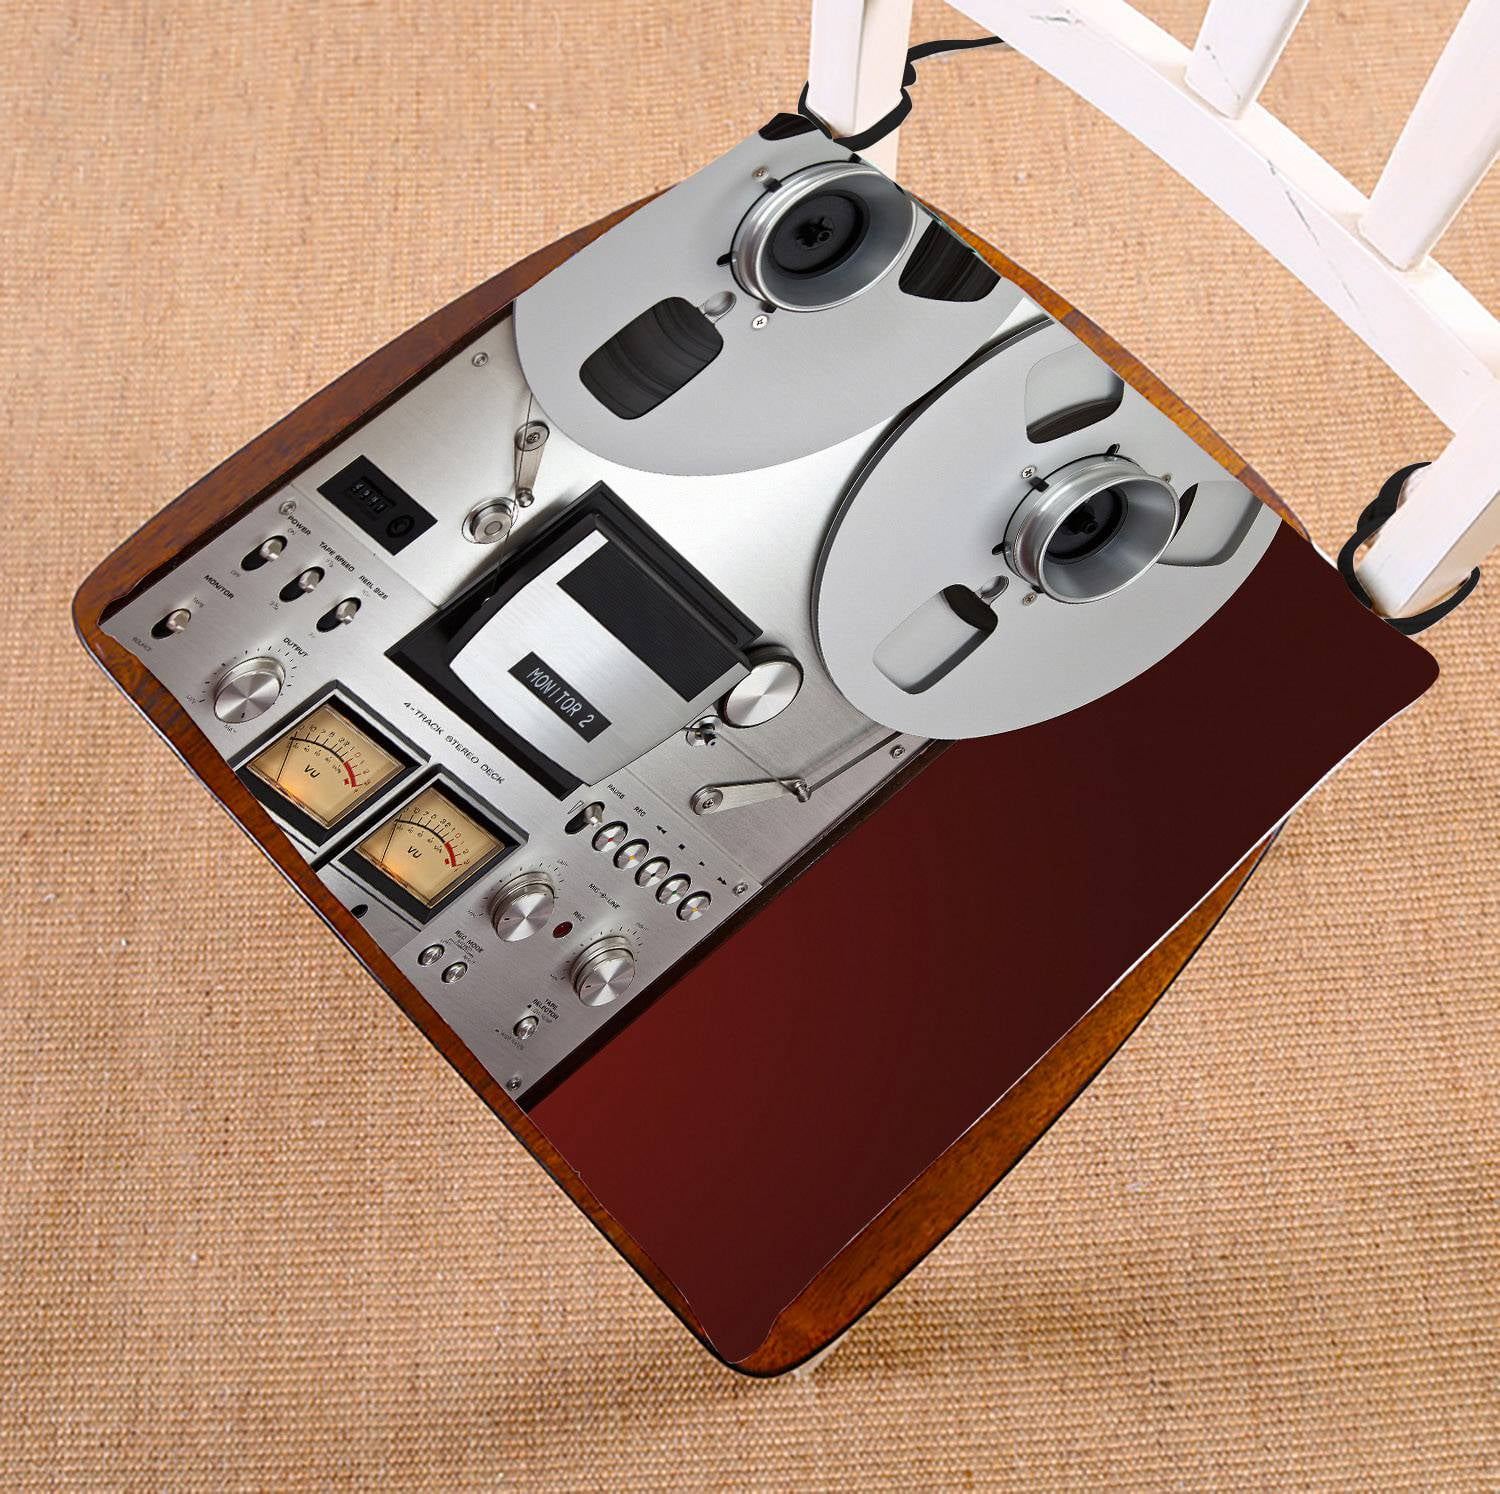 ECZJNT Stereo Open Reel Tape Deck Recorder Vintage Device seat pad chair  pads seat cushion 16x16 Inch 